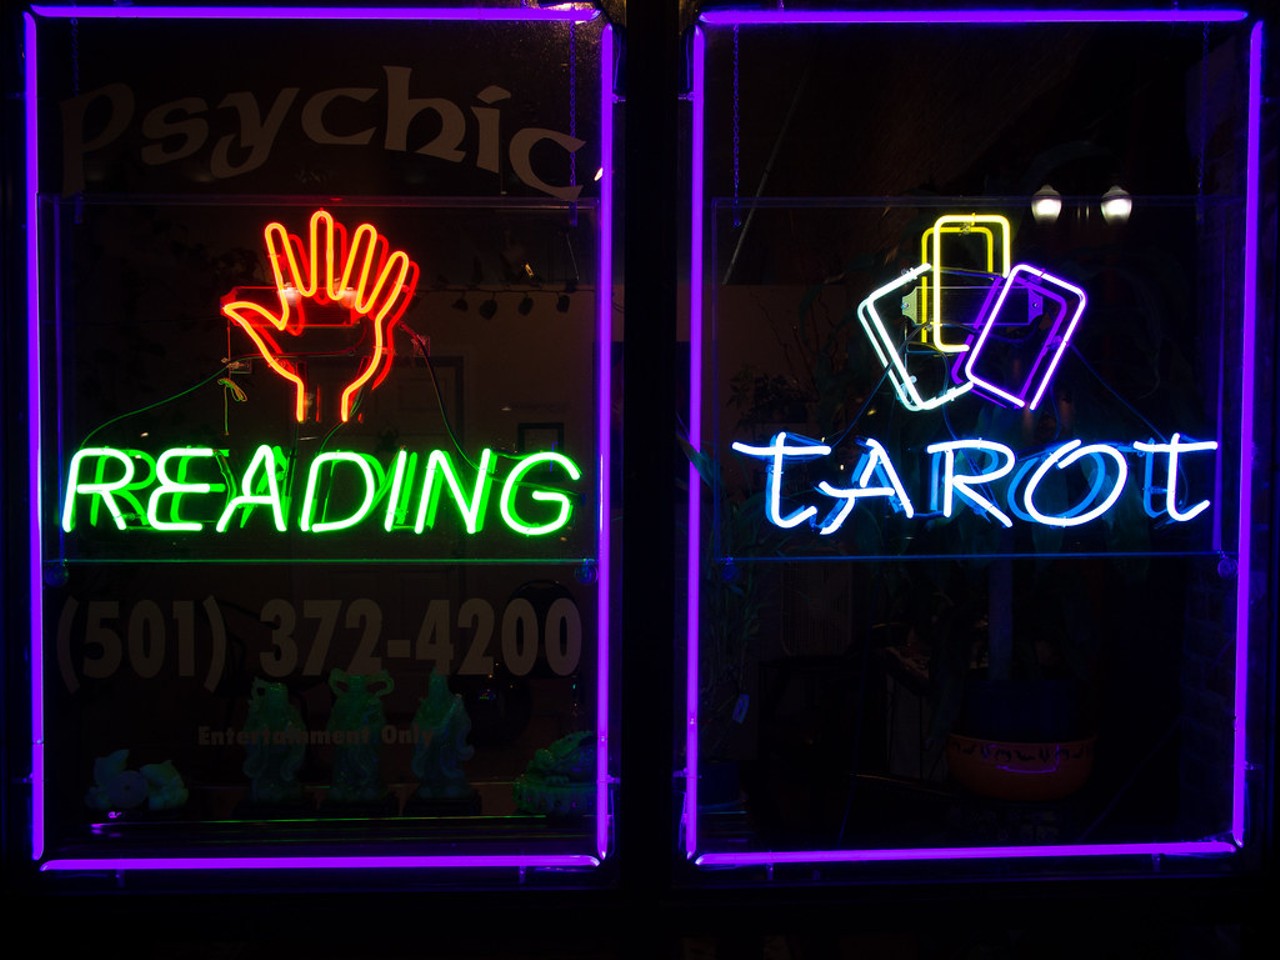 A Tarot Reading Experience 
Readings By Lilly, 534 E 200th St., 216-486-2610 
Lilly offers tarot reading sessions to couples interested in connecting on a deeper level. Indulge in a psychic reading class with your date and experience a whole new world on your first date.
Photo via Seandavis/Flickr